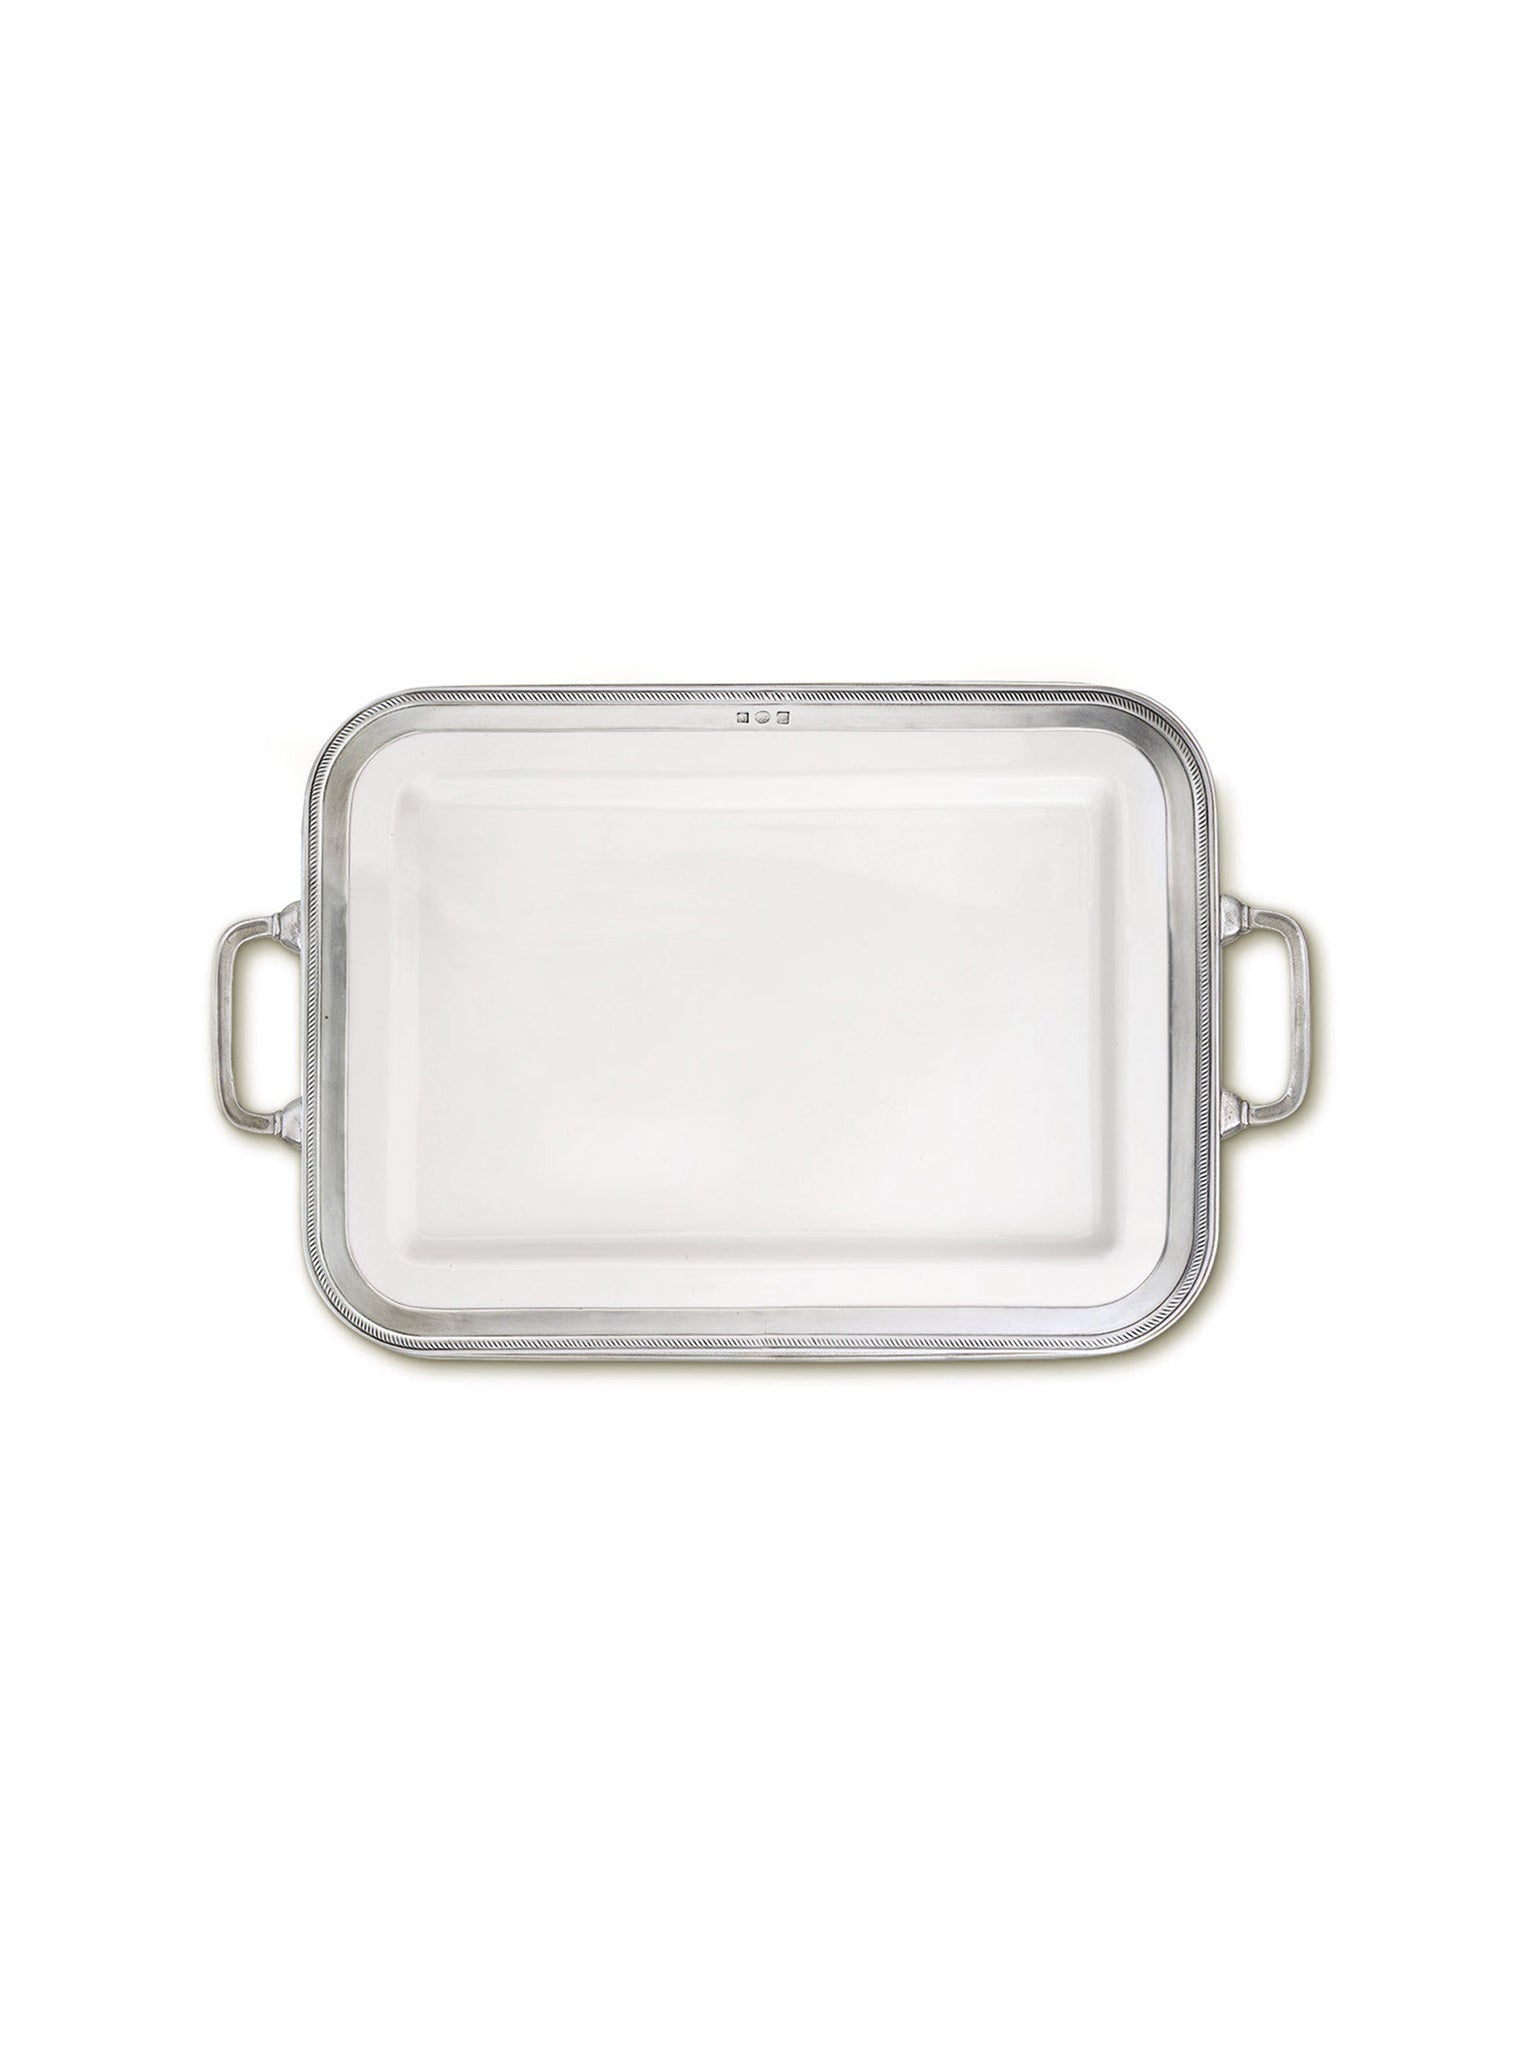 MATCH Pewter Luisa Rectangle Platter with Handle Weston Table